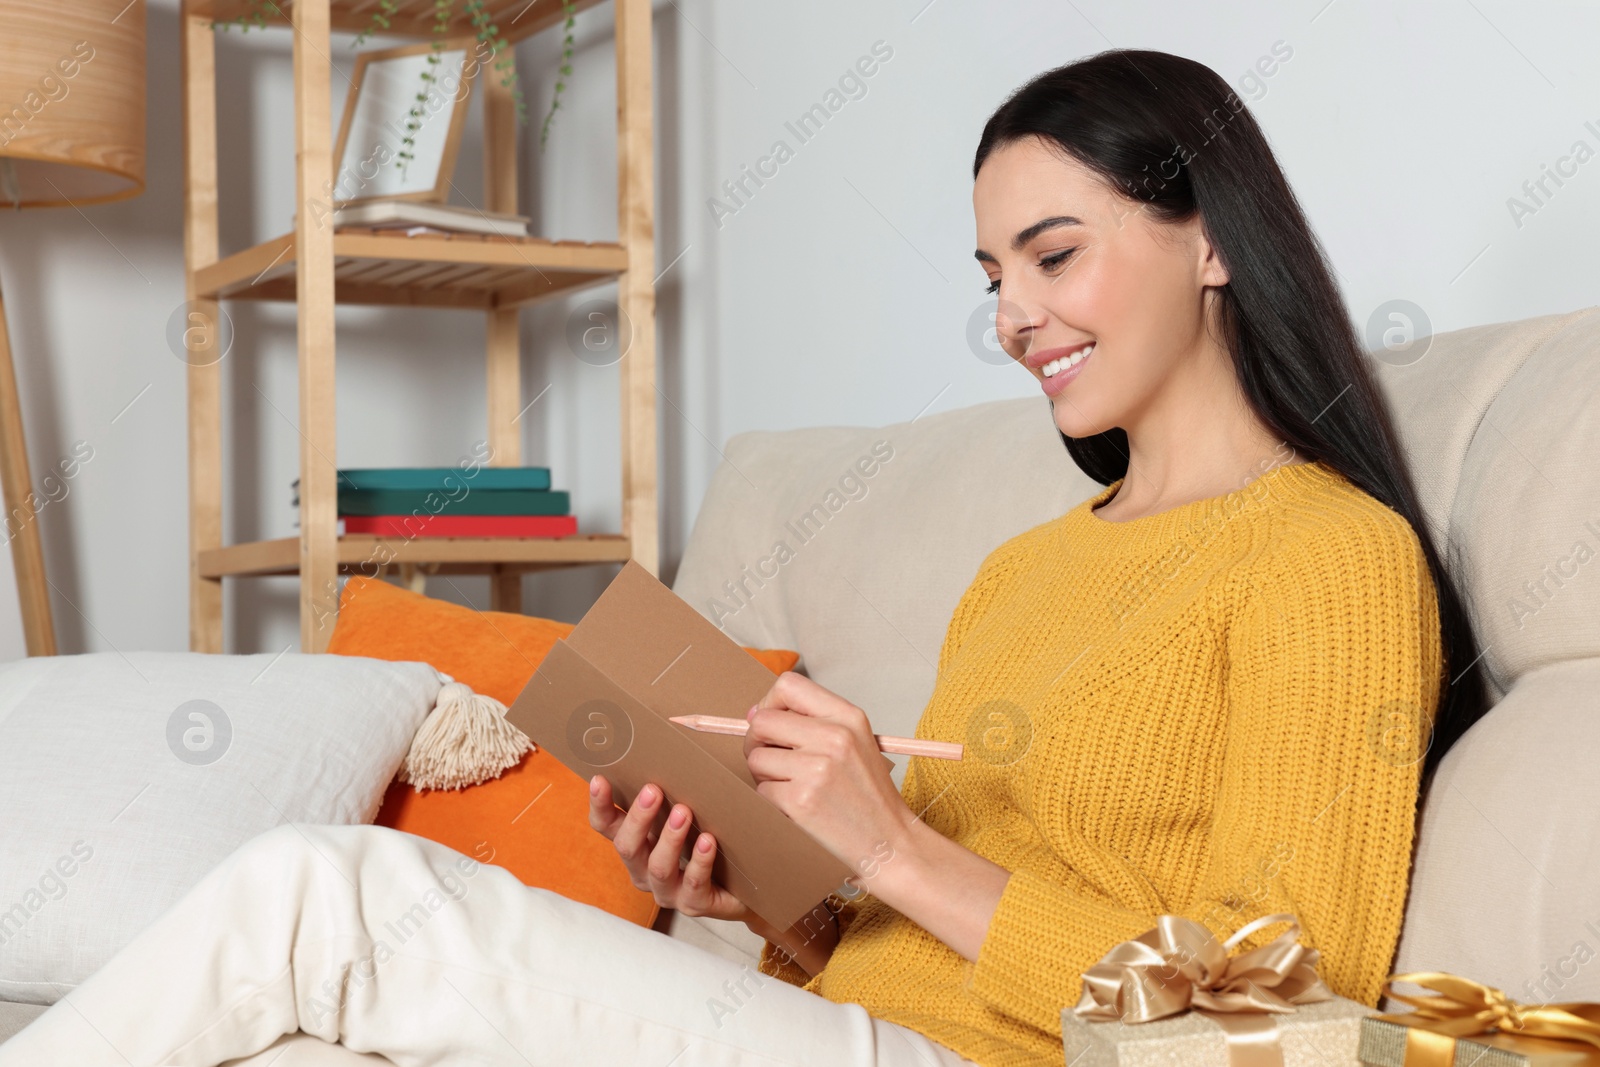 Photo of Happy woman reading greeting card on sofa in living room